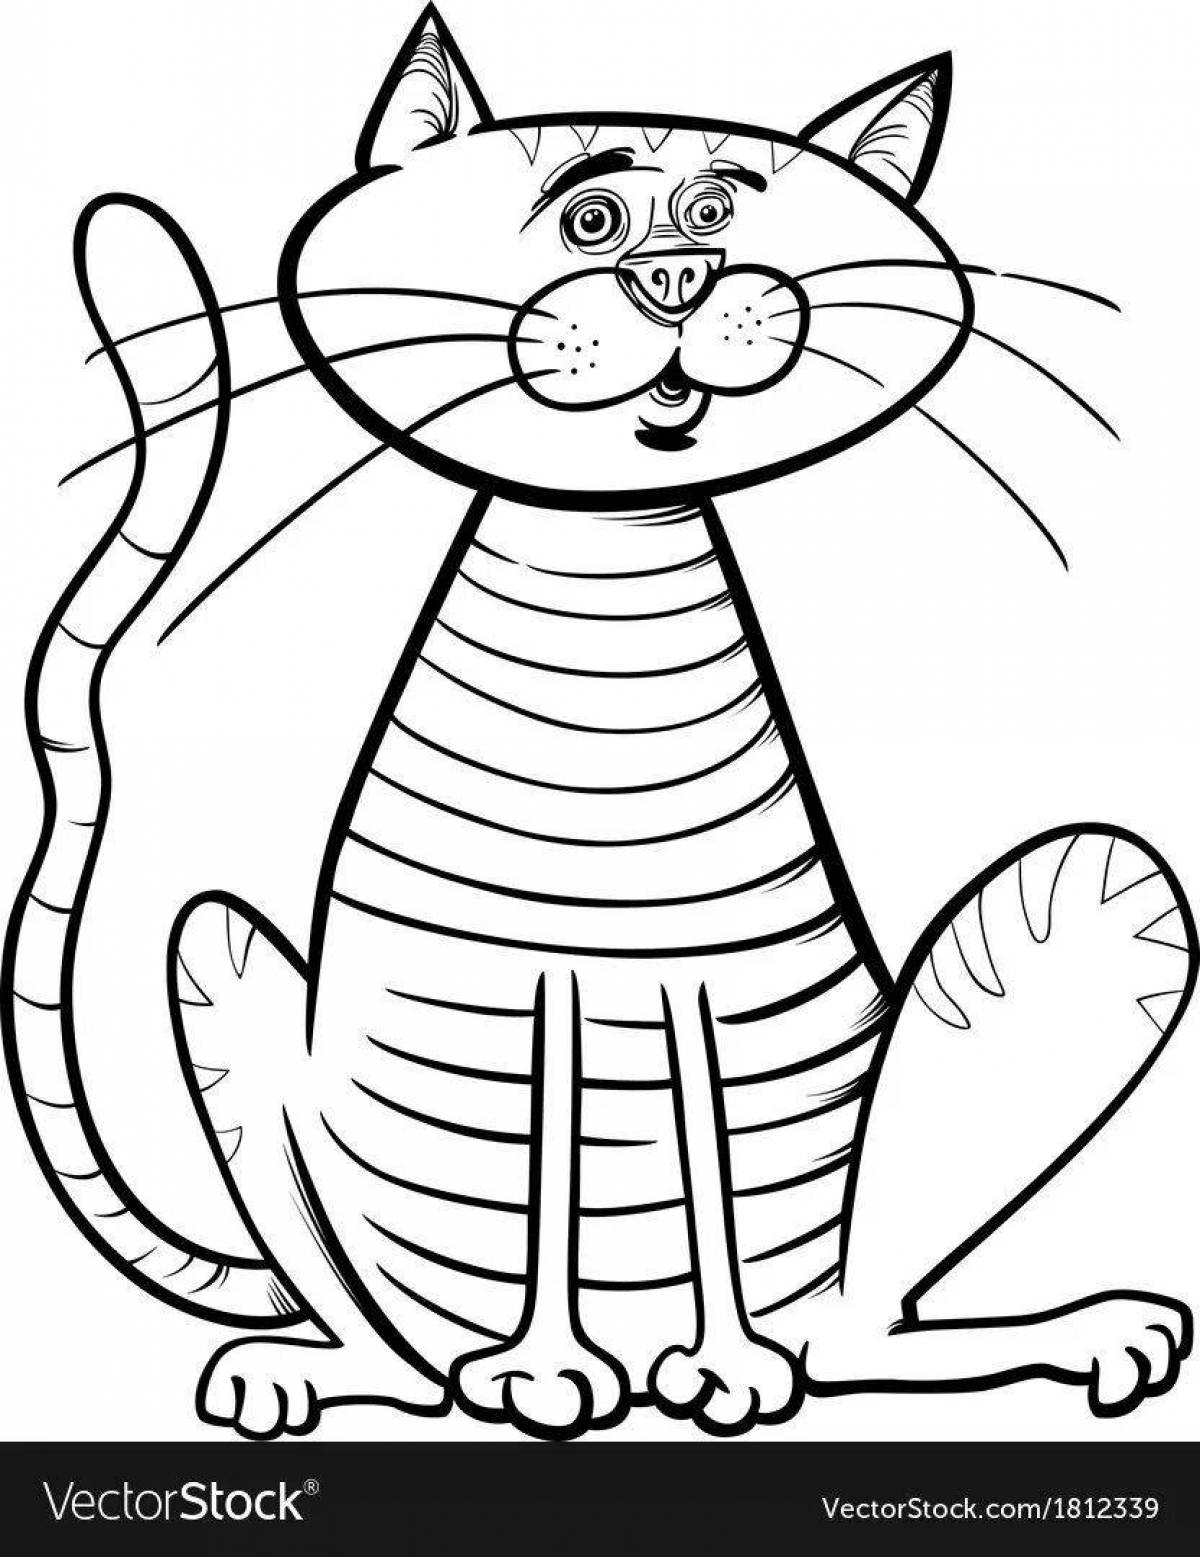 Sweet tabby cat coloring page